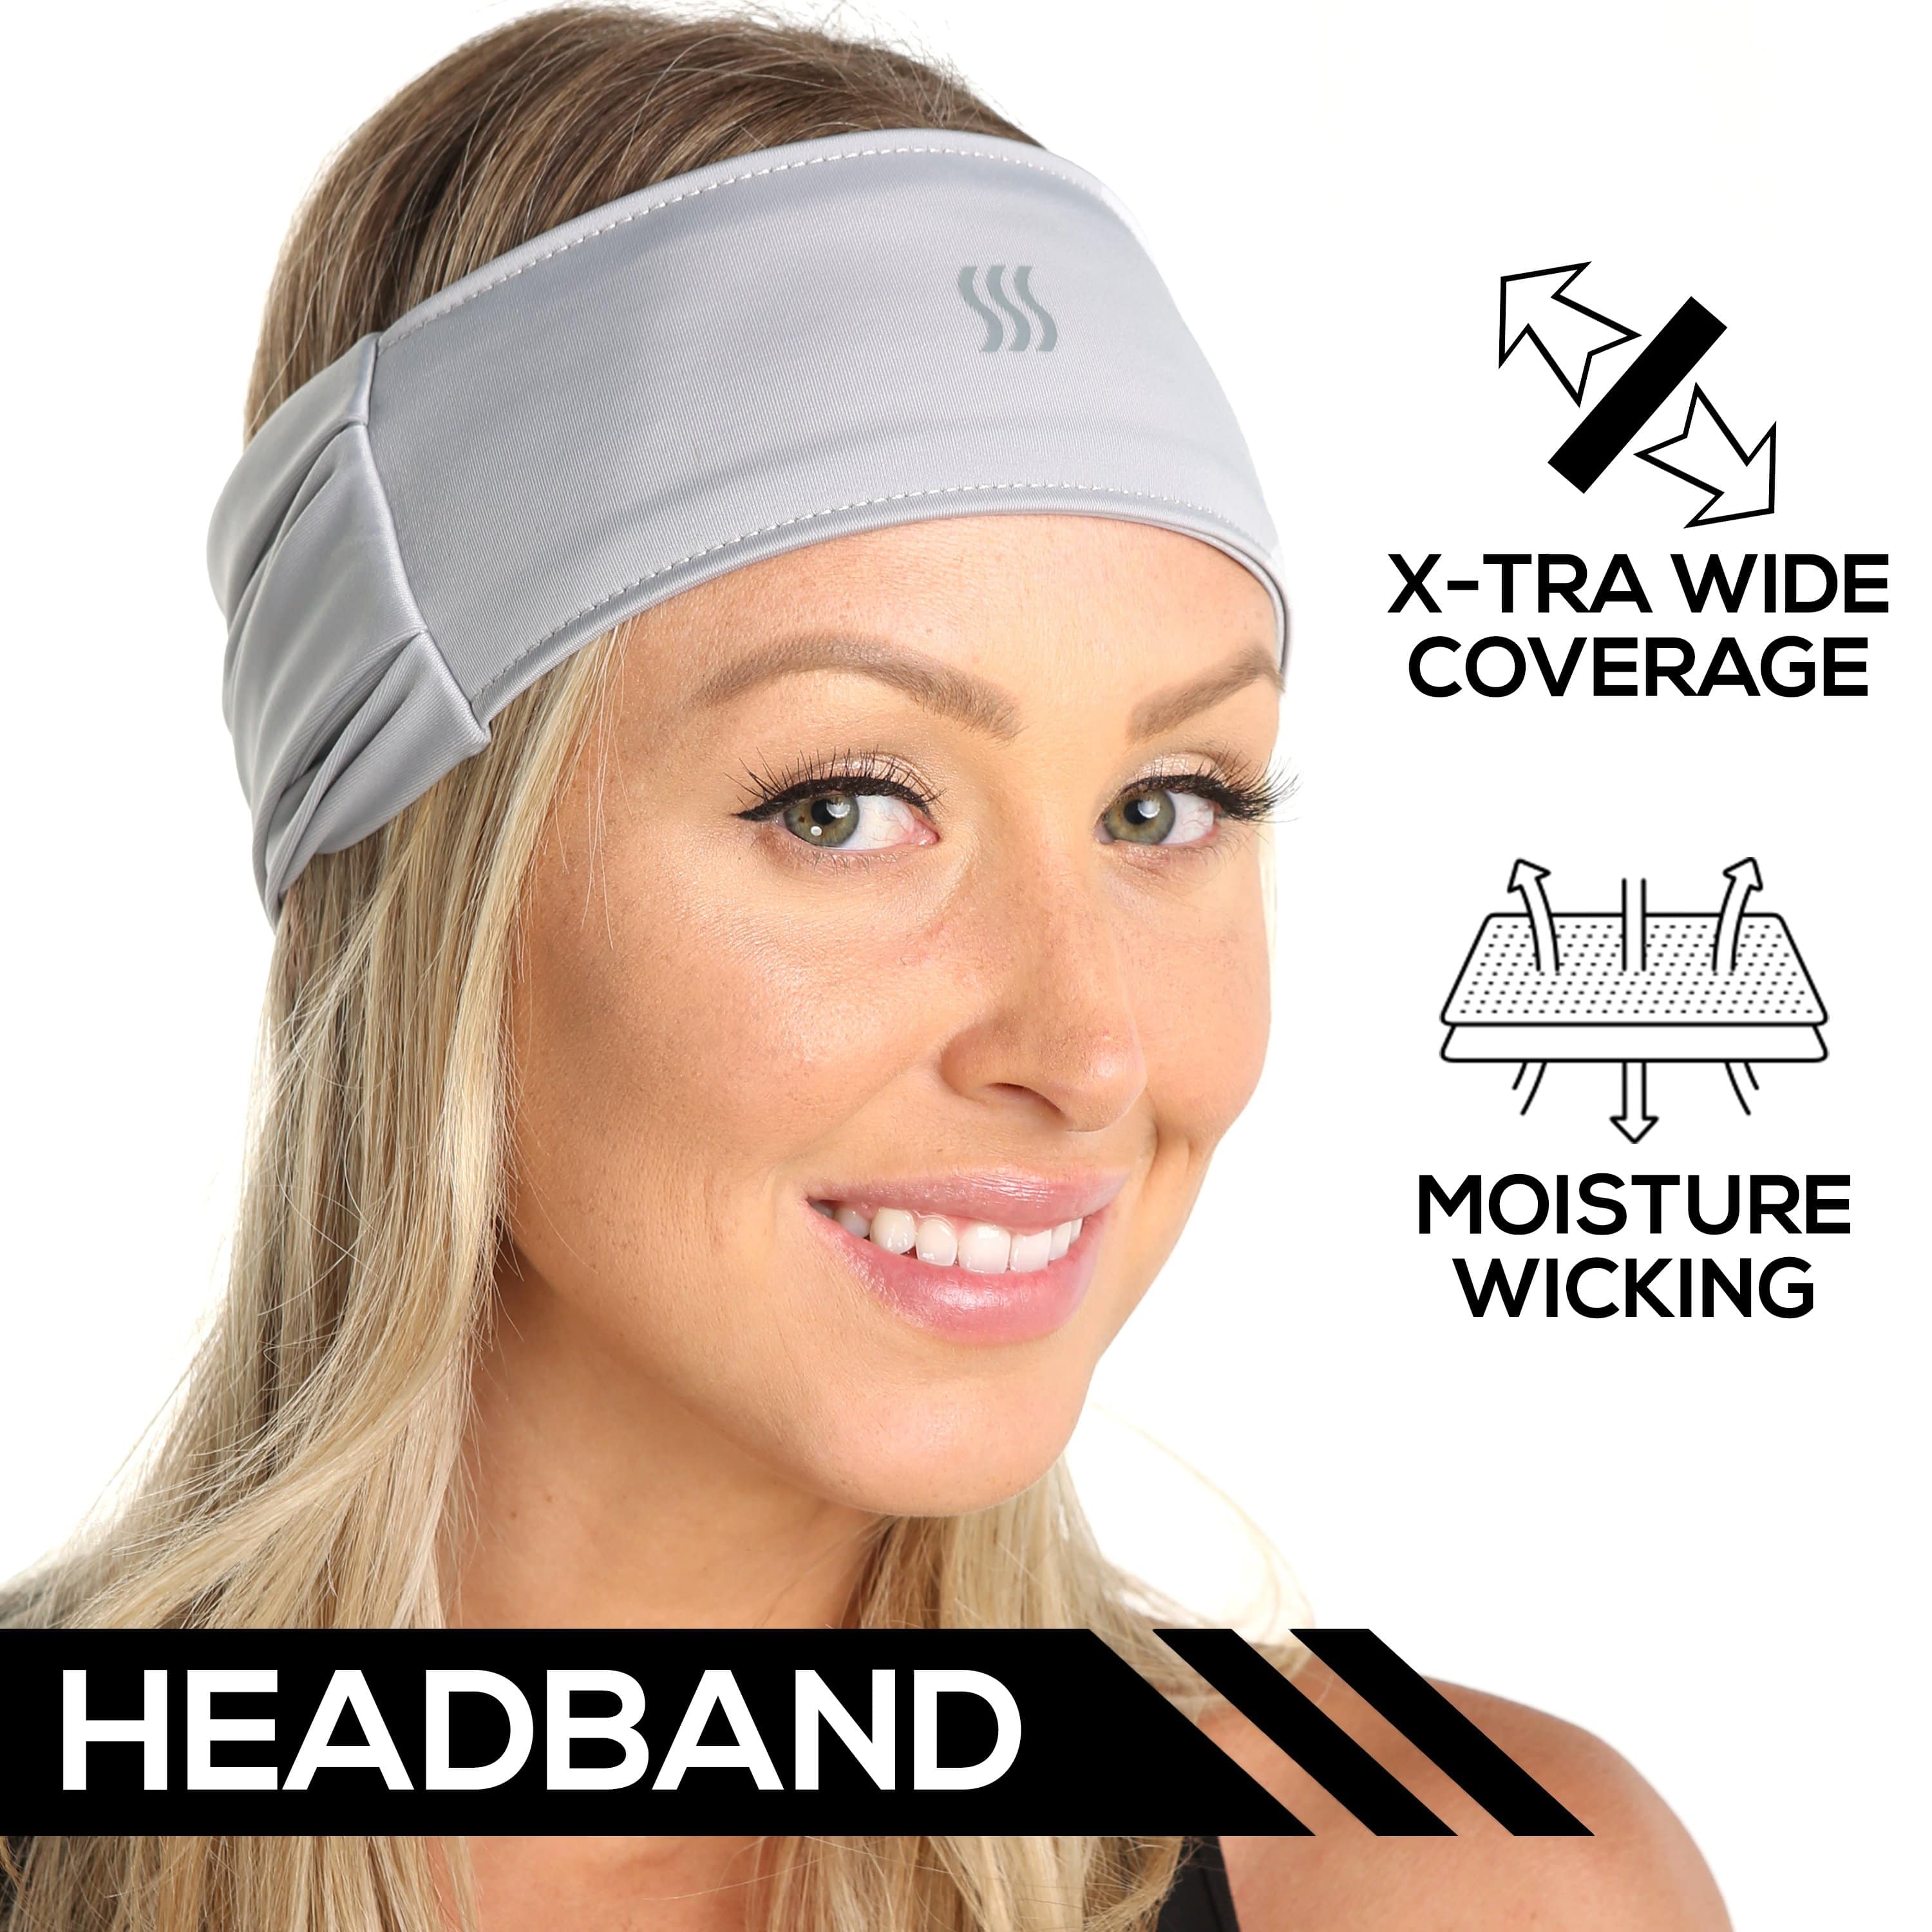 Women wearing an extra wide headband that helps with sweat while doing yoga, running, exercising.